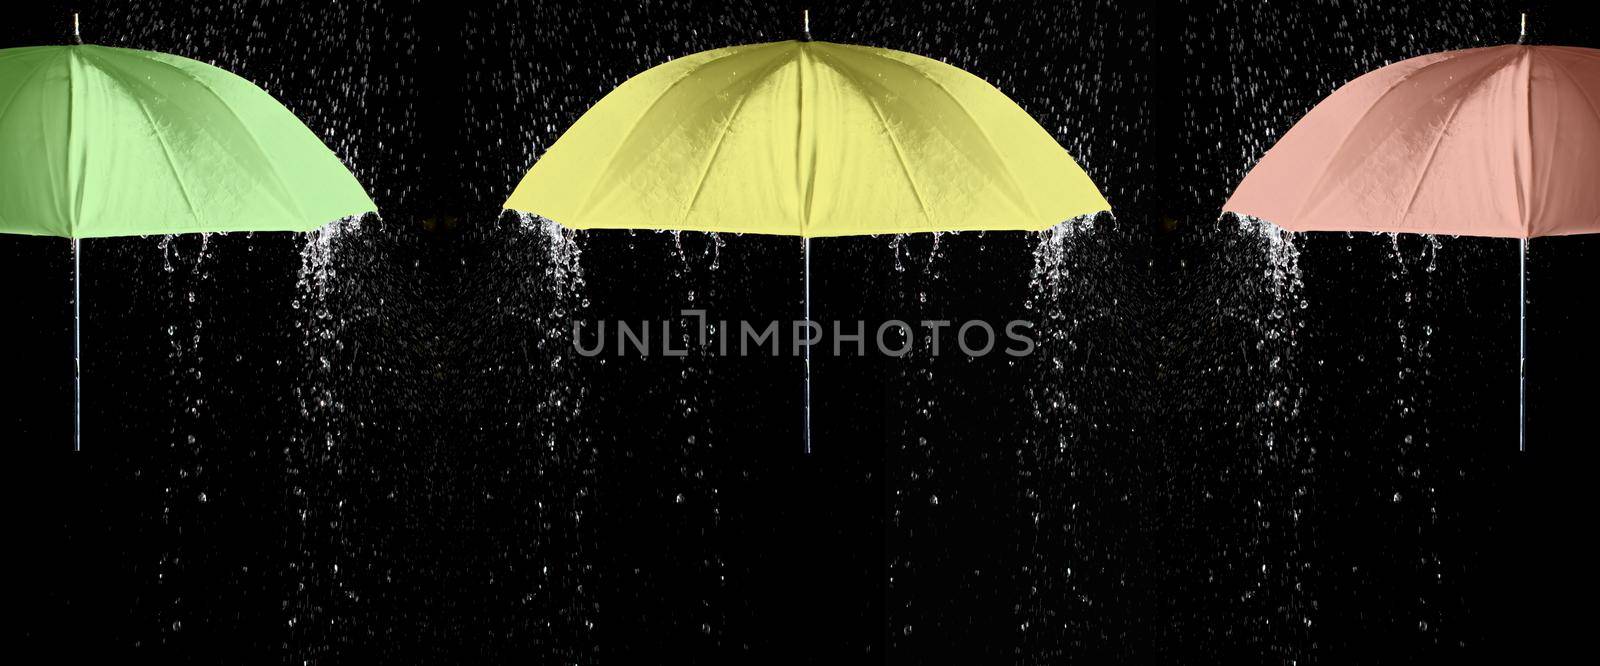 Green, yellow and red umbrellas under raindrops with black background. Business and fashion concept.